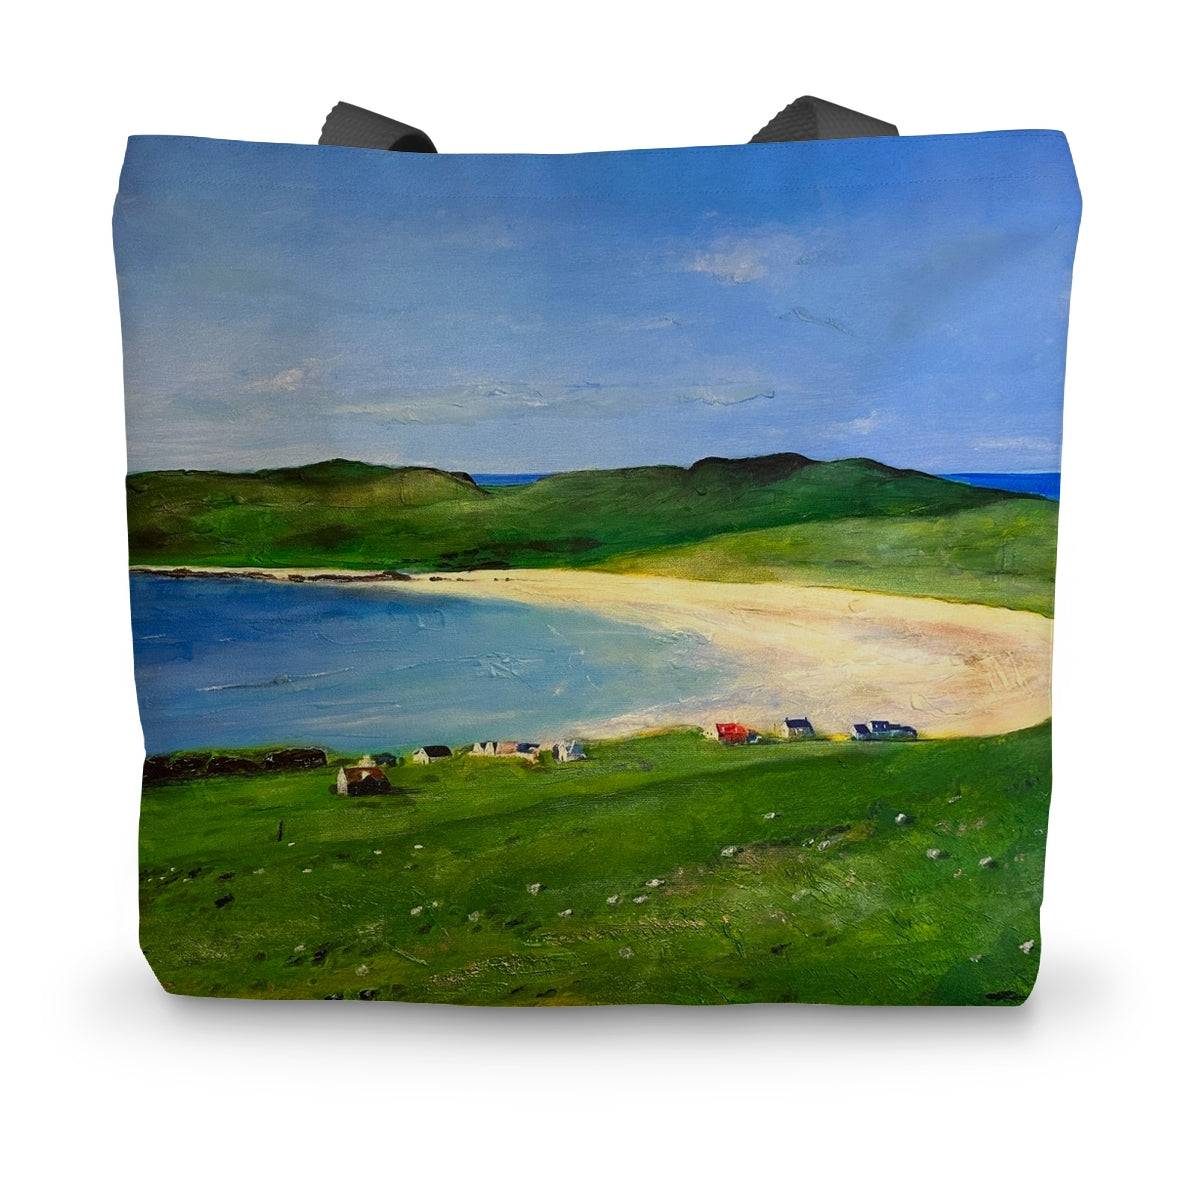 Balephuil Beach Tiree Art Gifts Canvas Tote Bag-Bags-Hebridean Islands Art Gallery-14"x18.5"-Paintings, Prints, Homeware, Art Gifts From Scotland By Scottish Artist Kevin Hunter